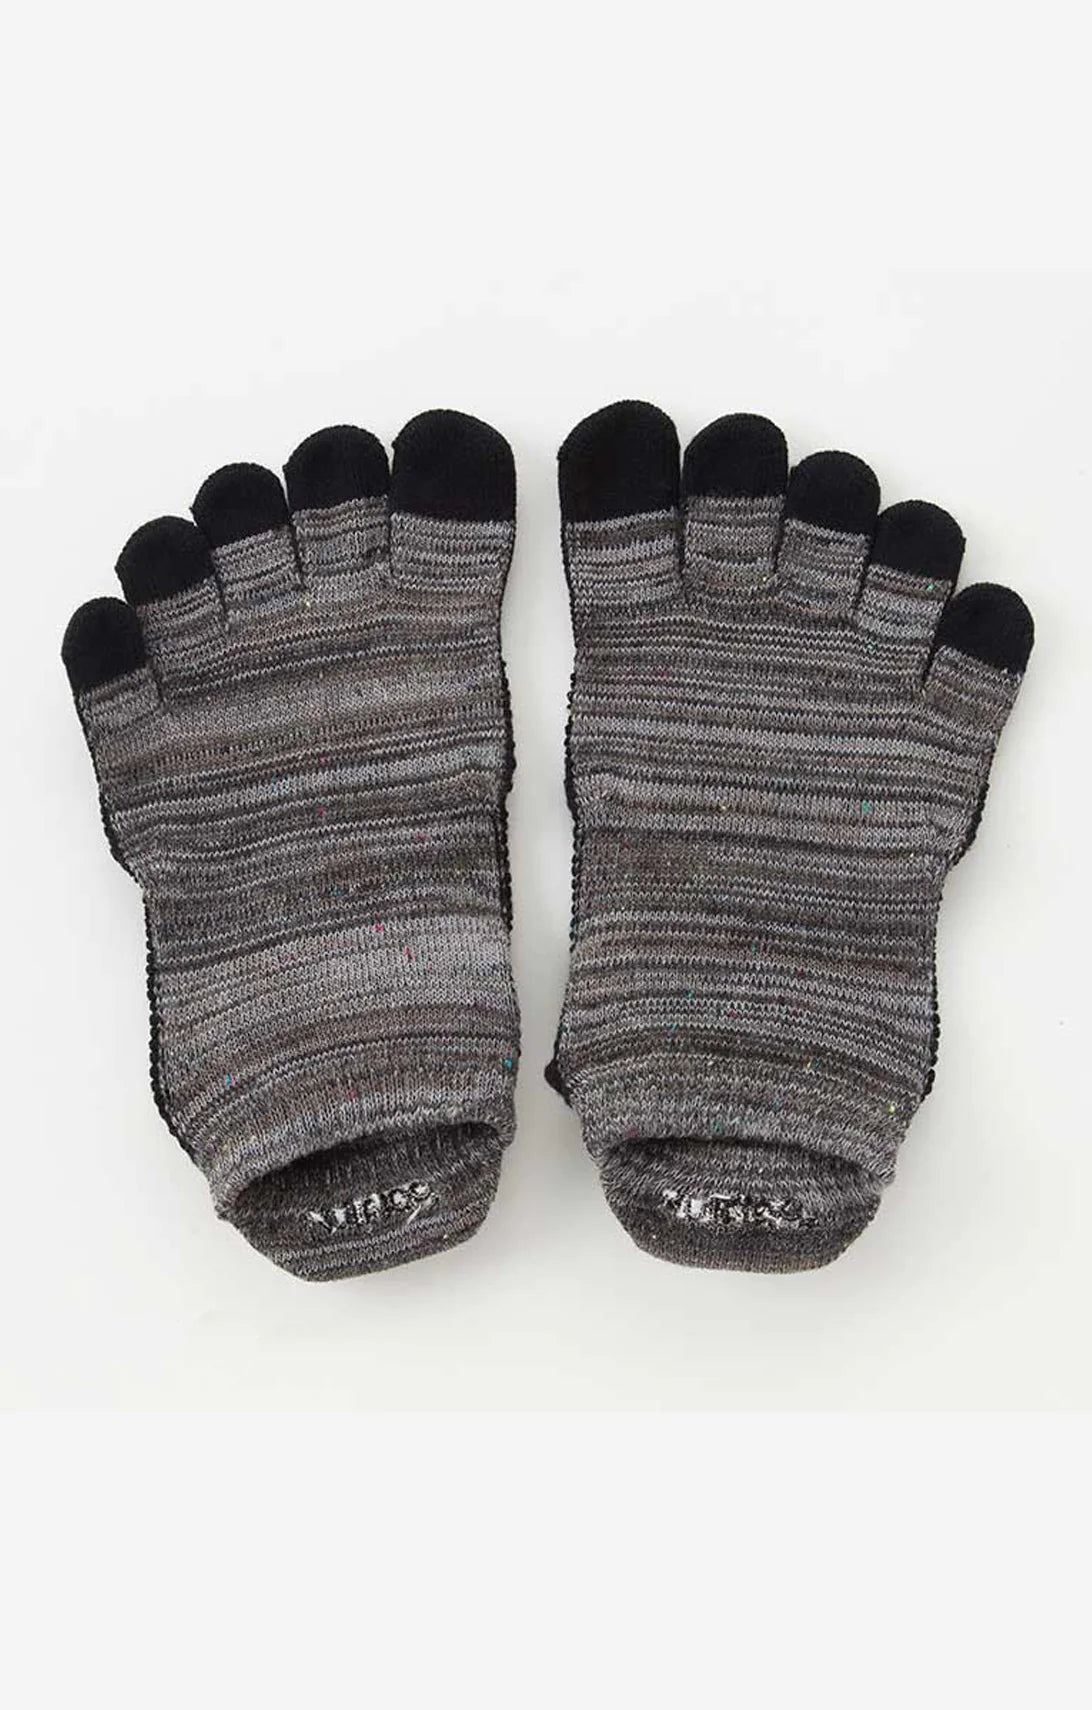 This is a picture of the brand name Knitido+ product name HEATHER FOOTIE TOE GRIP SOCKS WITH *POWER PADS* in DARK GREY color